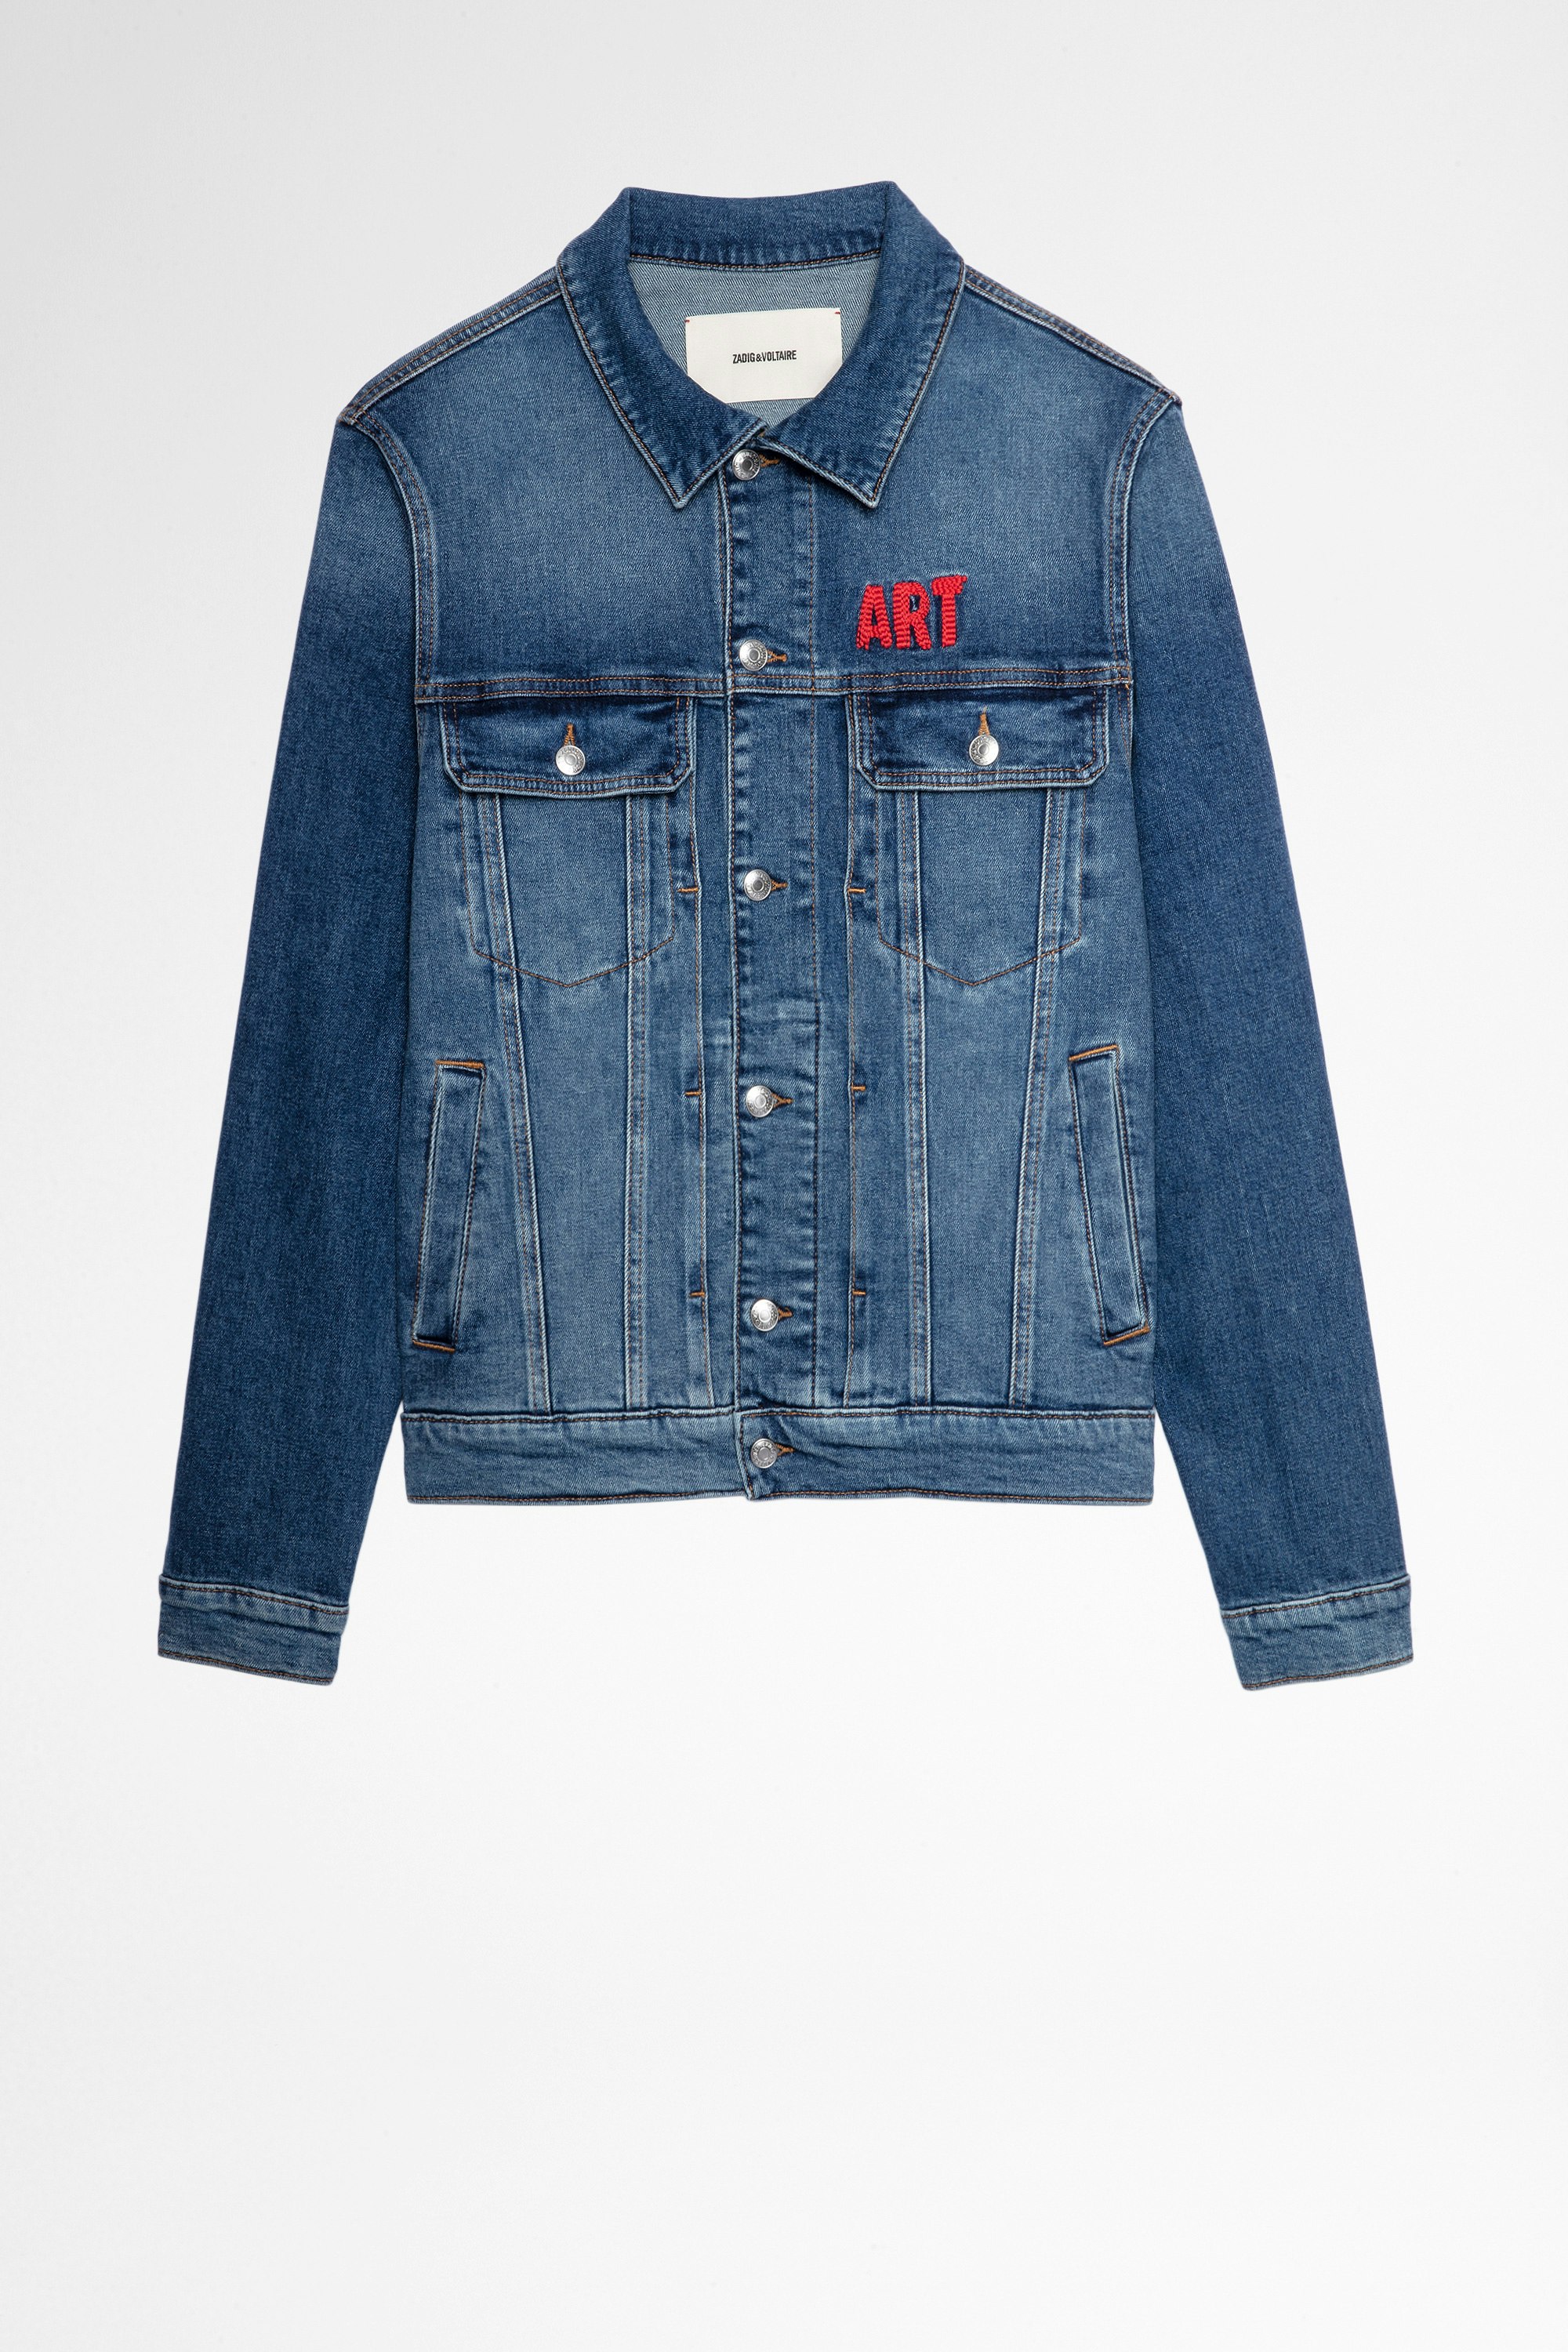 Base Denim Jacket Men's blue denim jacket with embroidered skull. Made with fibers from organic farming.